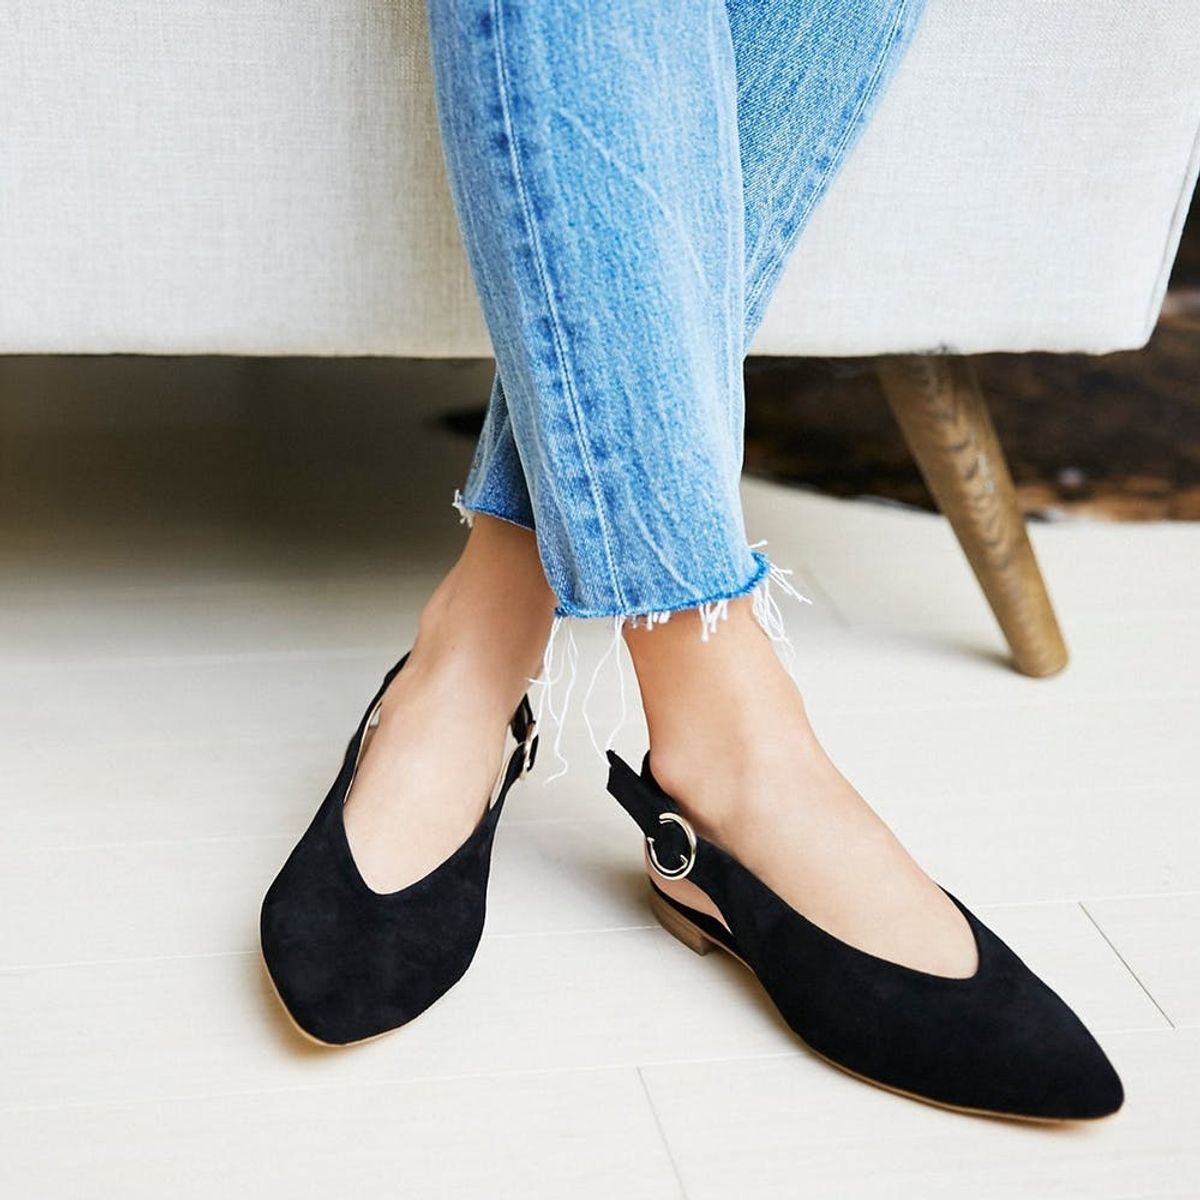 15 Pairs of Budget-Friendly Fall Shoes That Look Expensive AF - Brit + Co